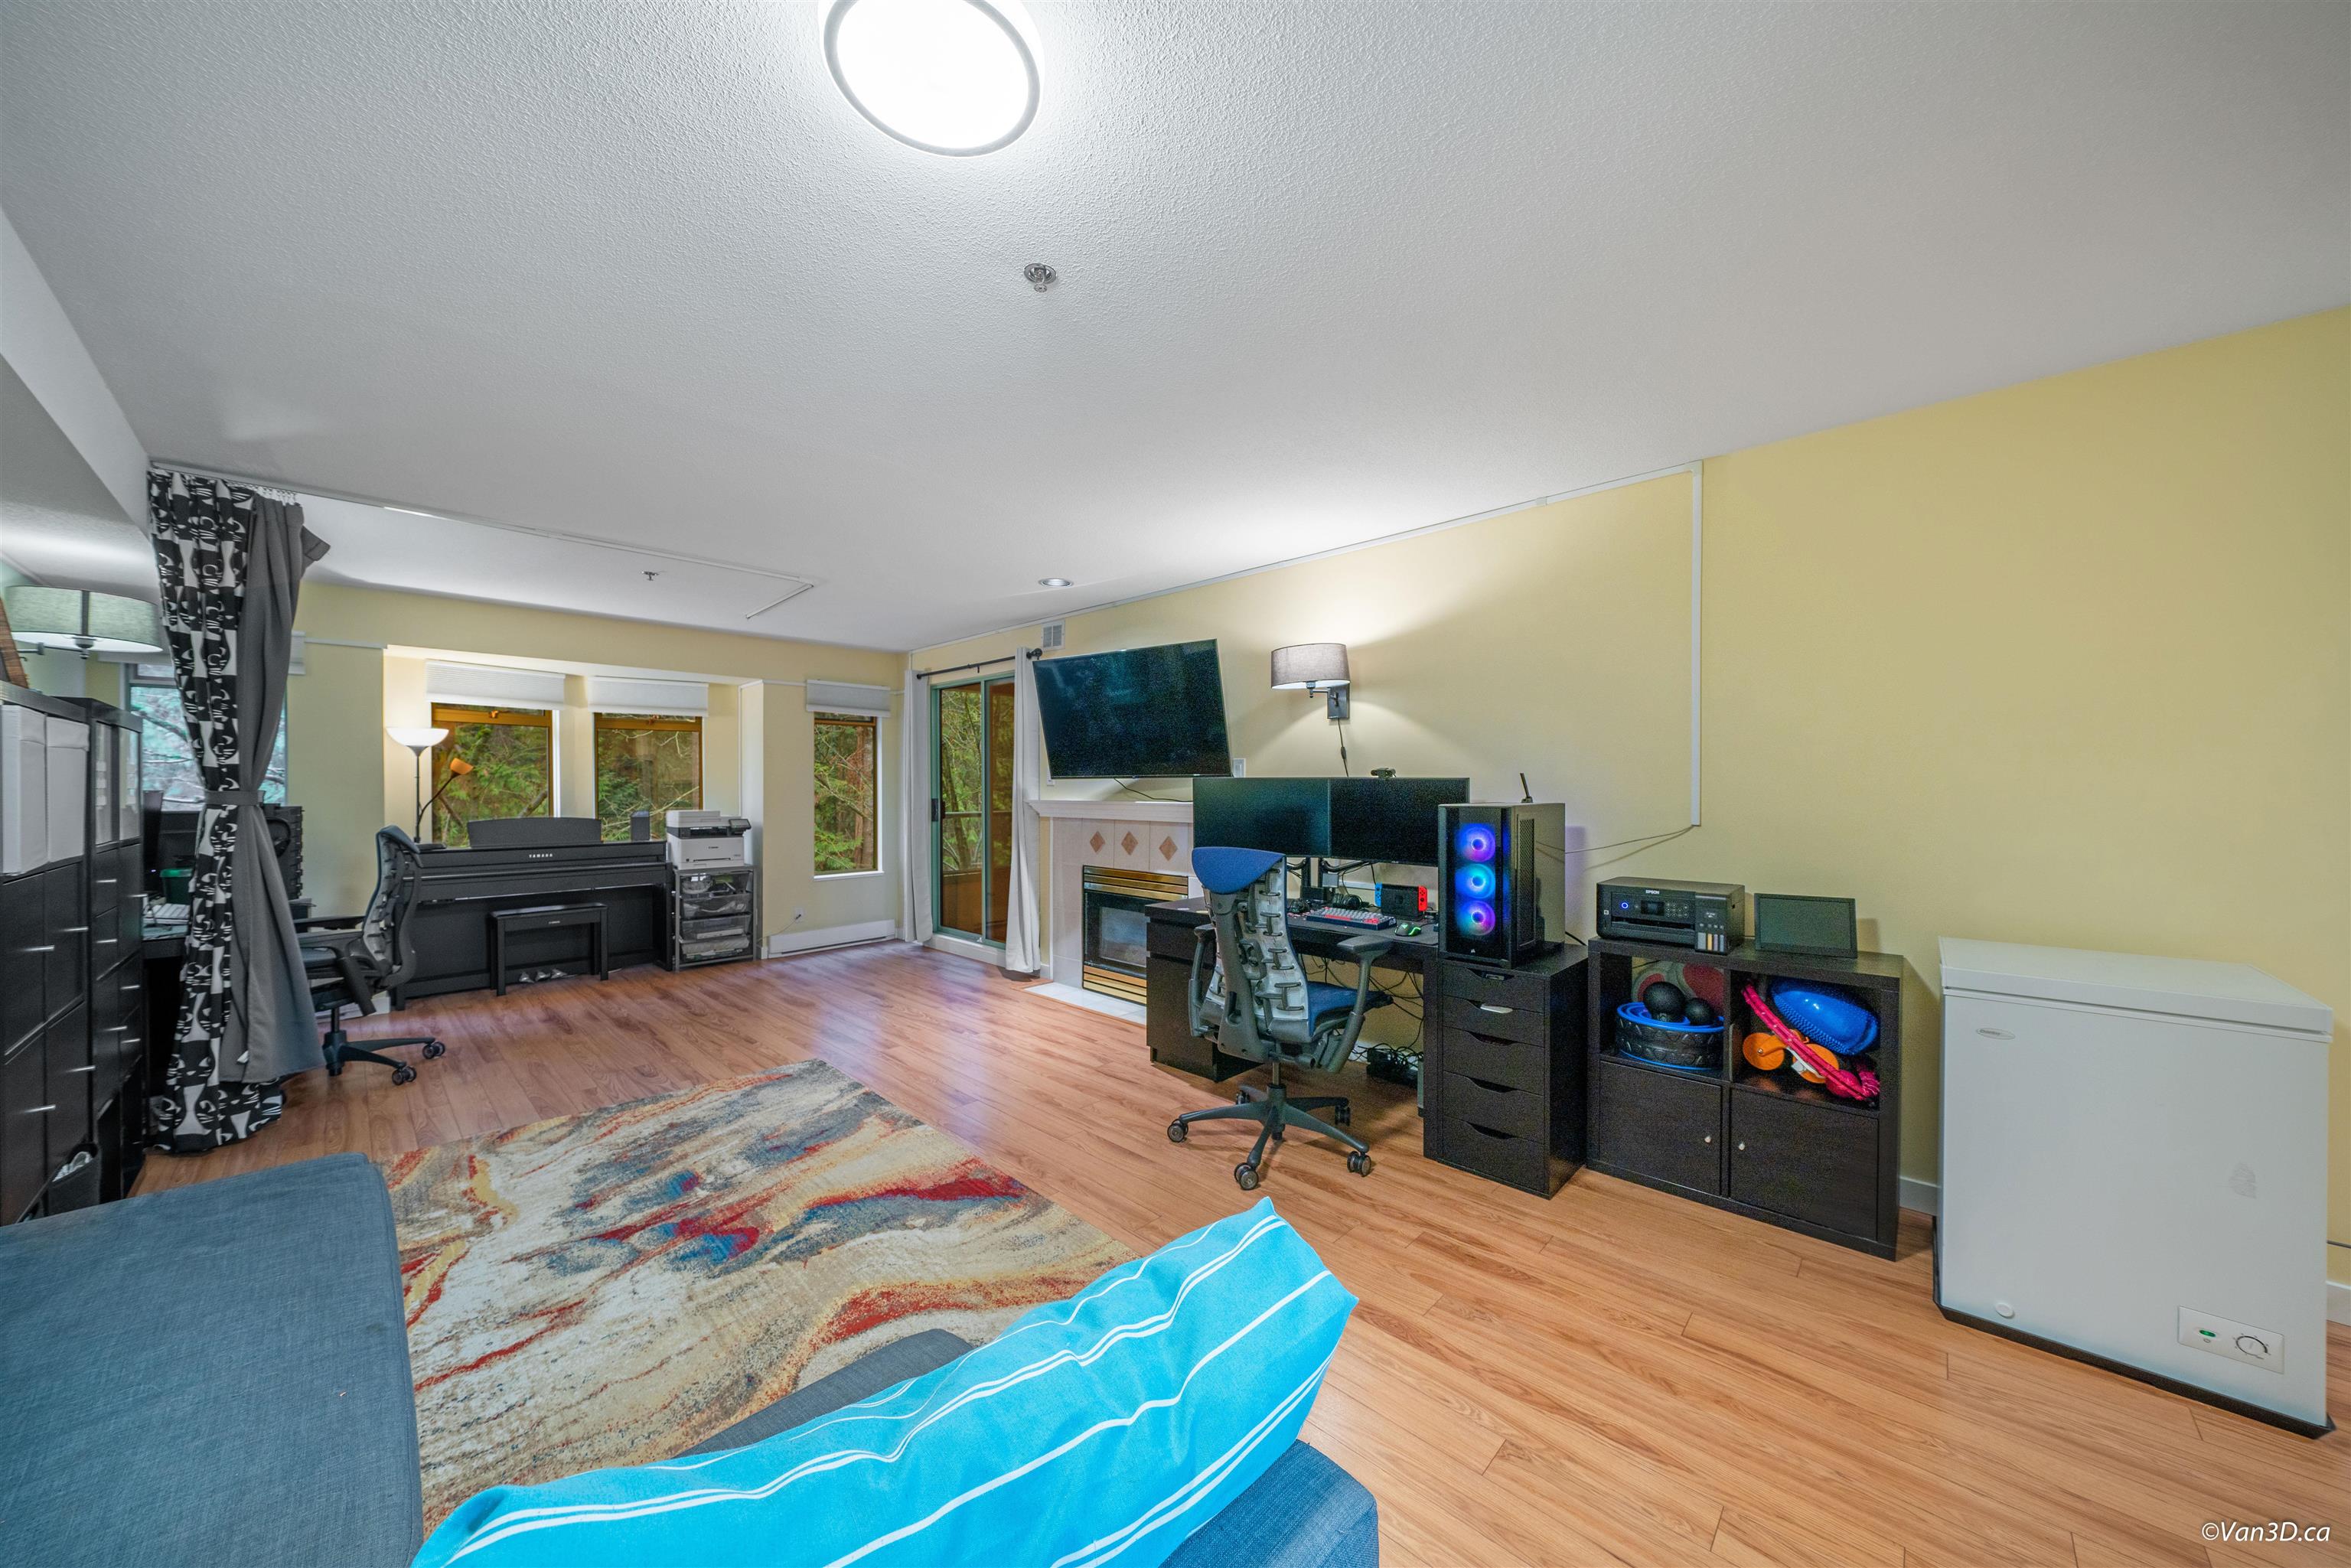 Listing image of 307 6737 STATION HILL COURT